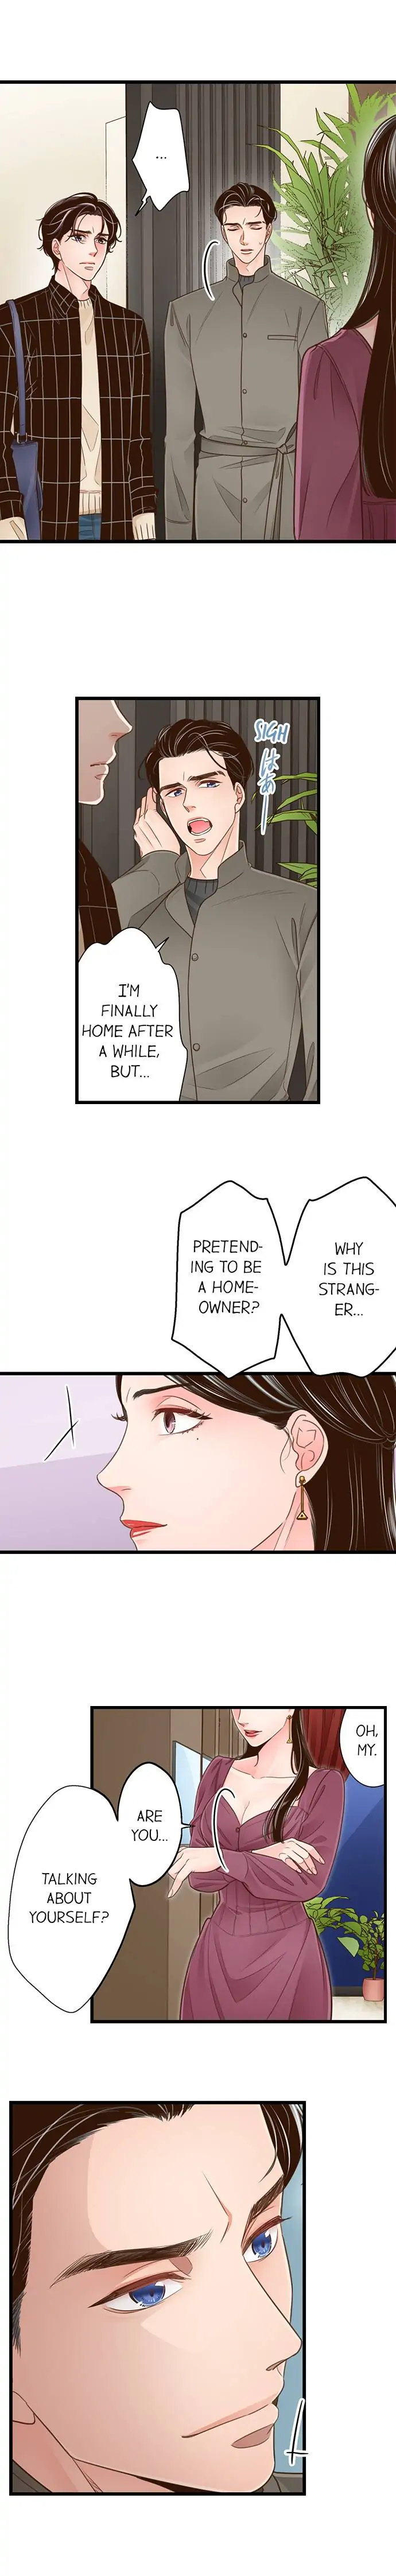 Yanagihara Is a Sex Addict. - Chapter 160 Page 2